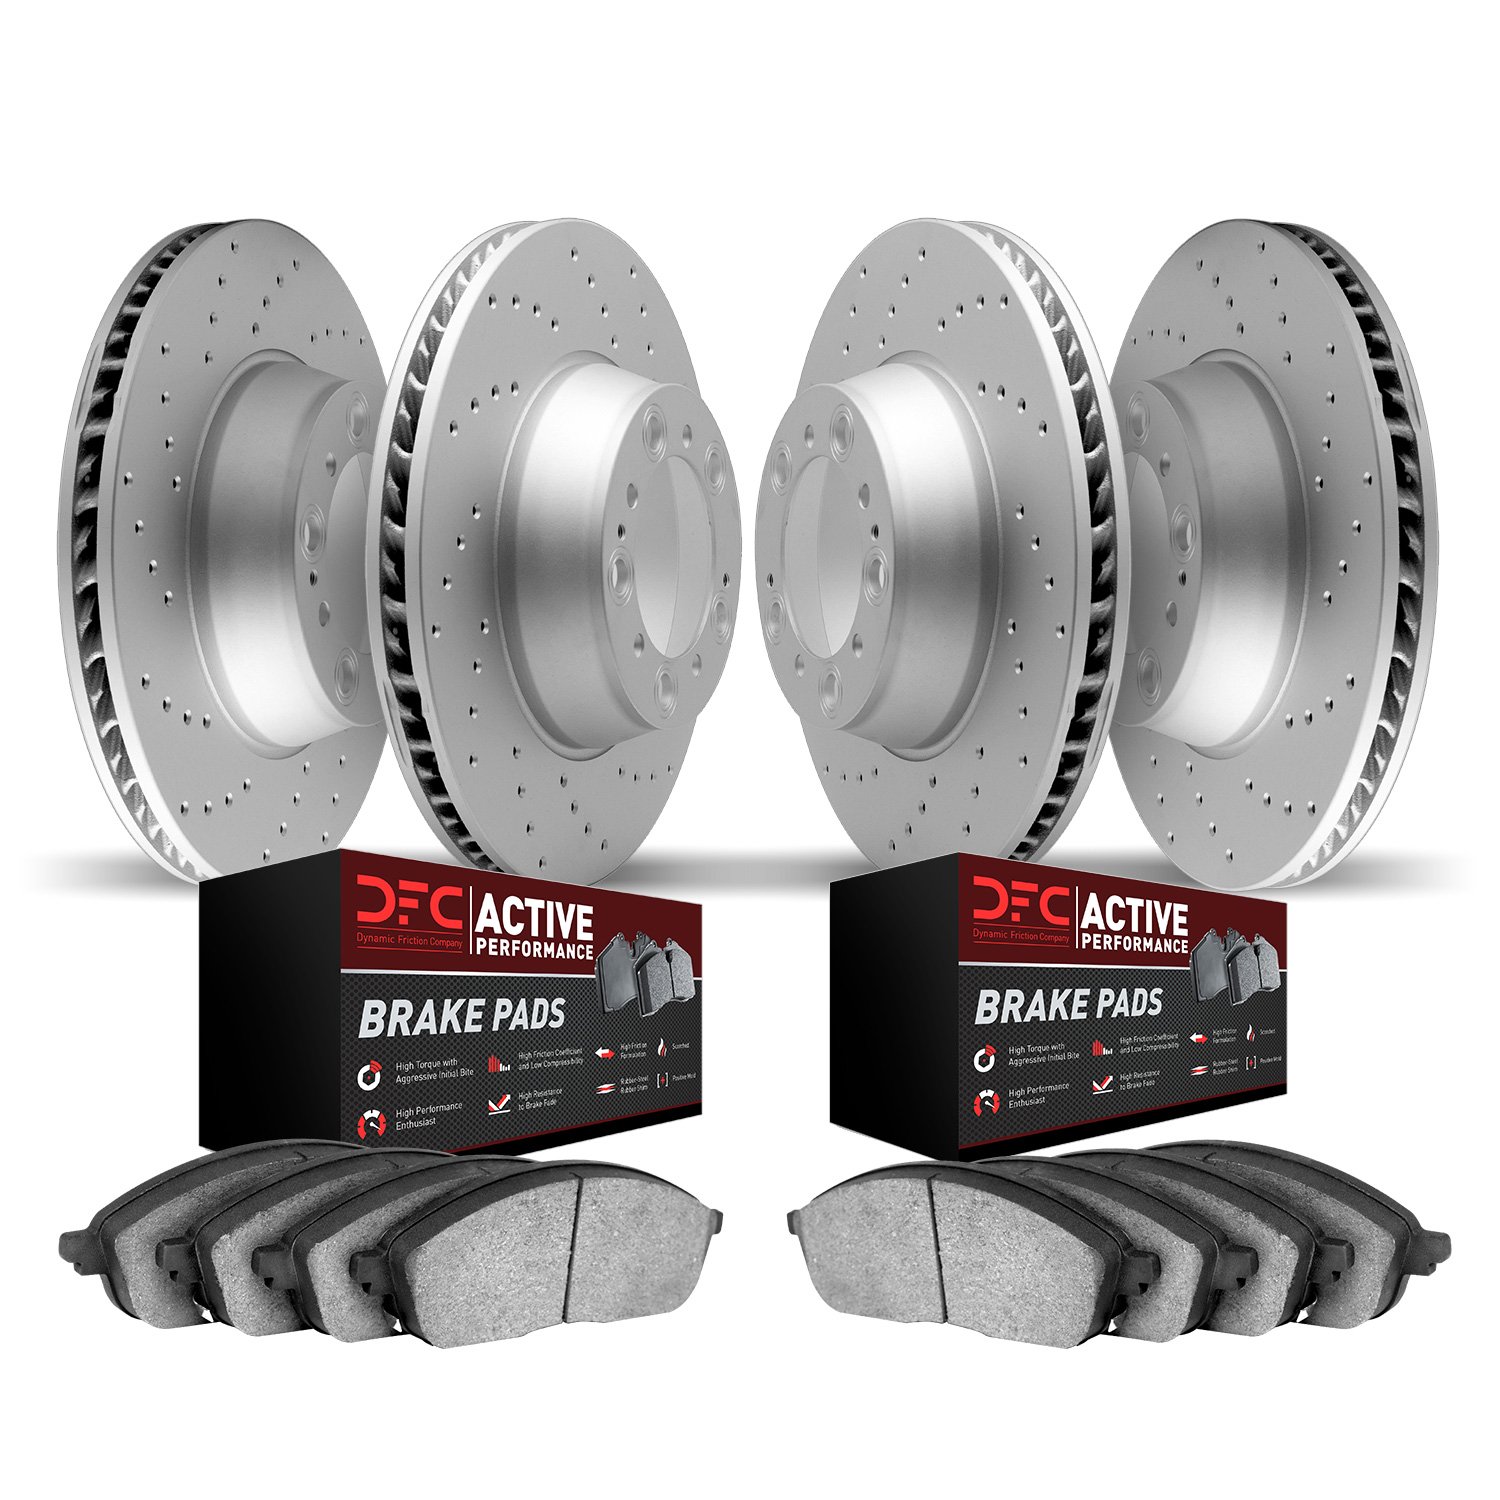 2704-67045 Geoperformance Drilled Brake Rotors with Active Performance Pads Kit, 2009-2016 Renault, Position: Front and Rear